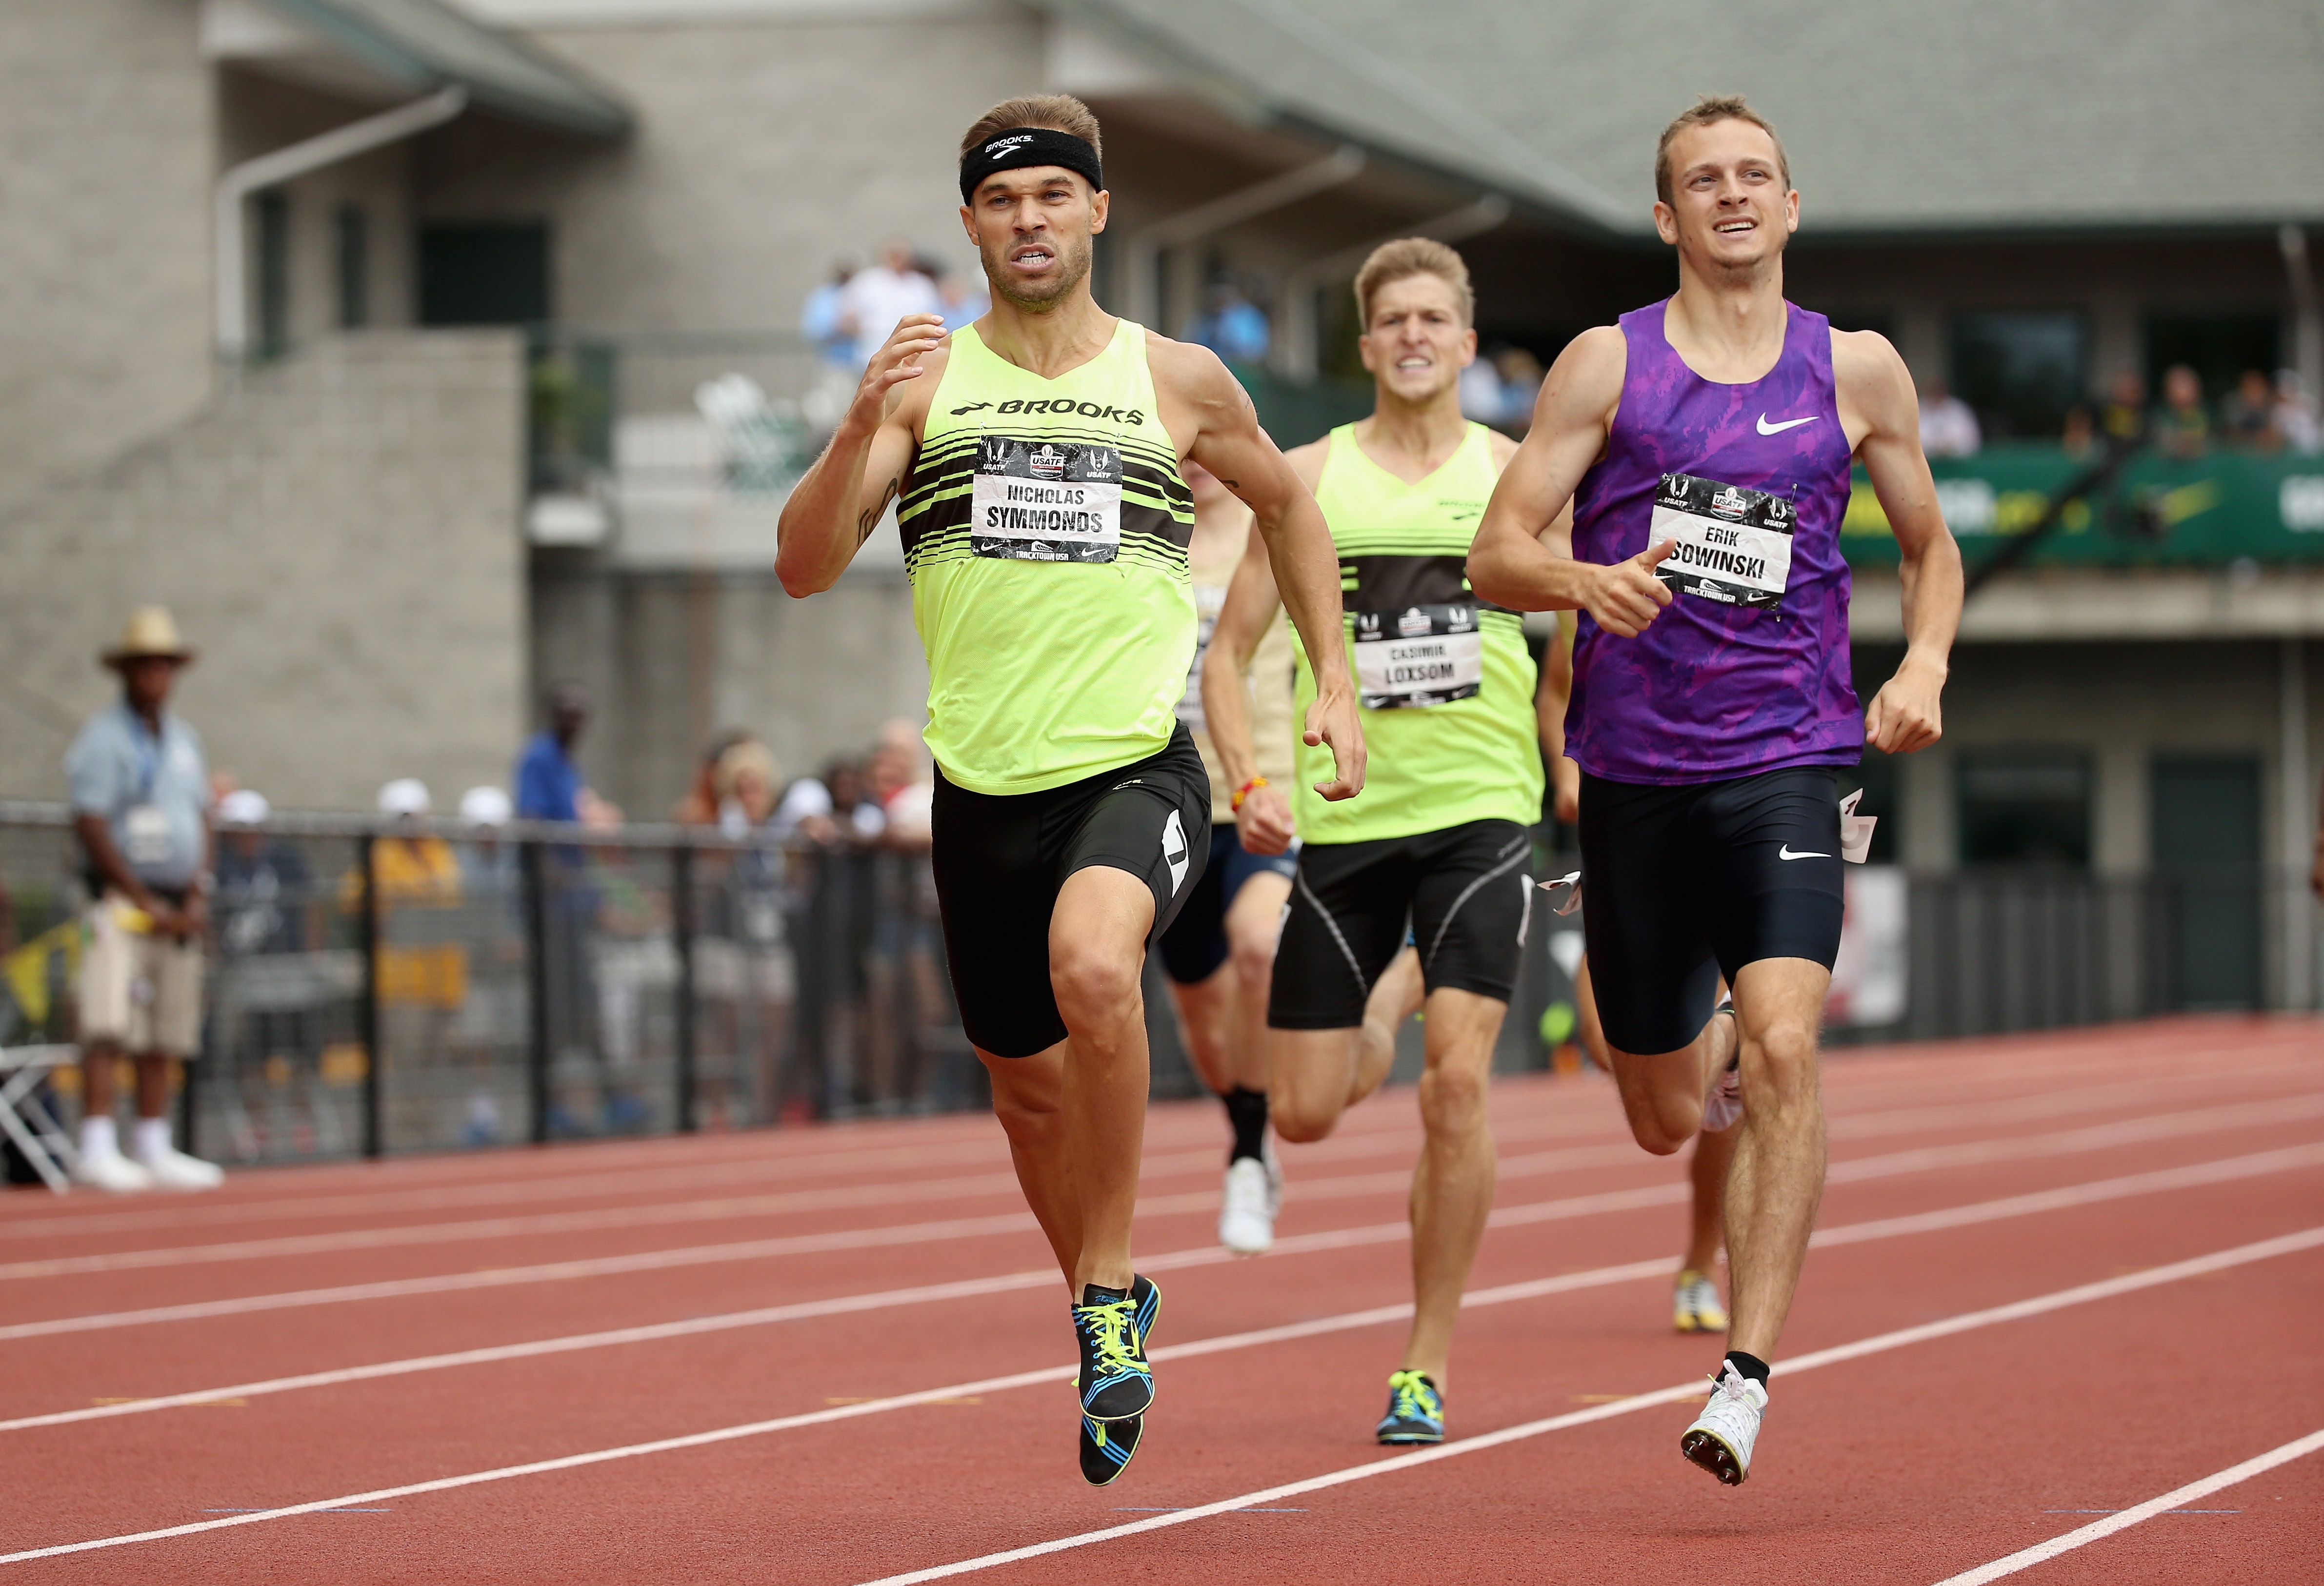 Nicholas Symmonds runs to victory in the Mens 800 Meter during day four of the 2015 USA Outdoor Track & Field Championships at Hayward Field on June 28, 2015 in Eugene, Oregon. (Photo by Andy Lyons/Getty Images)